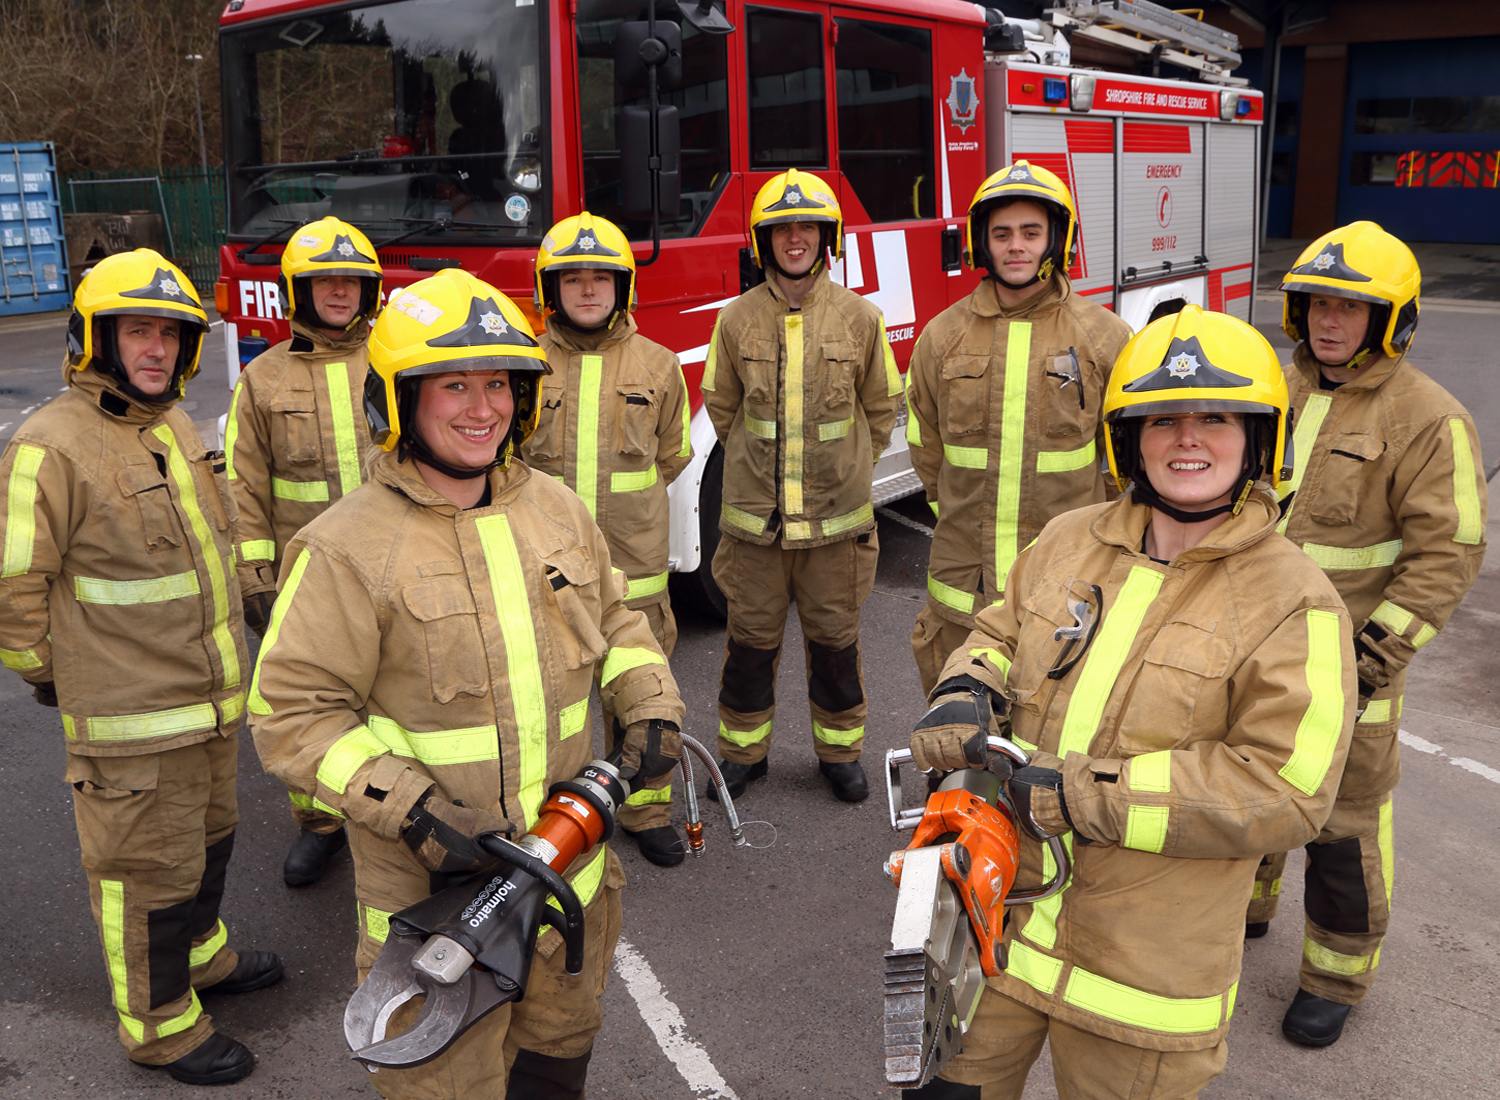 My Mums A Firefighter Shropshire Fire And Rescue Service